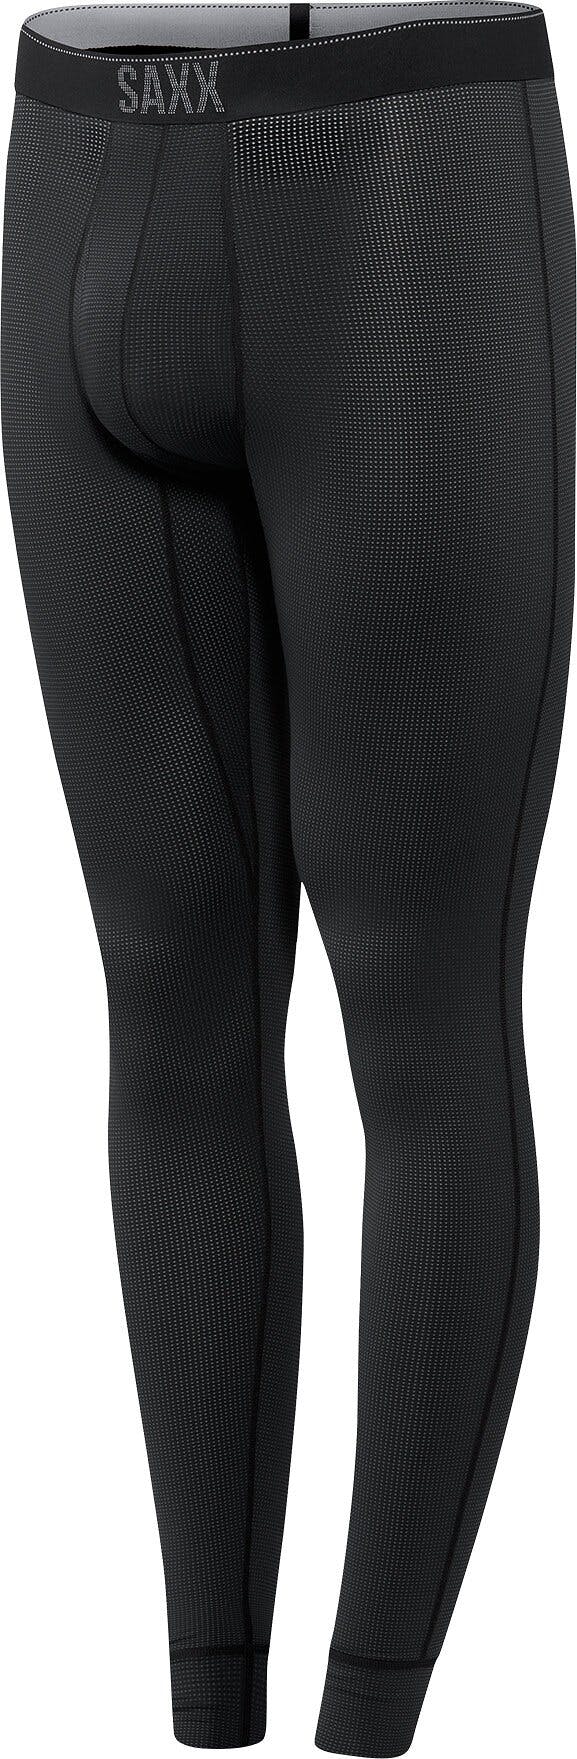 Product image for Quest Tight Fly - Men's